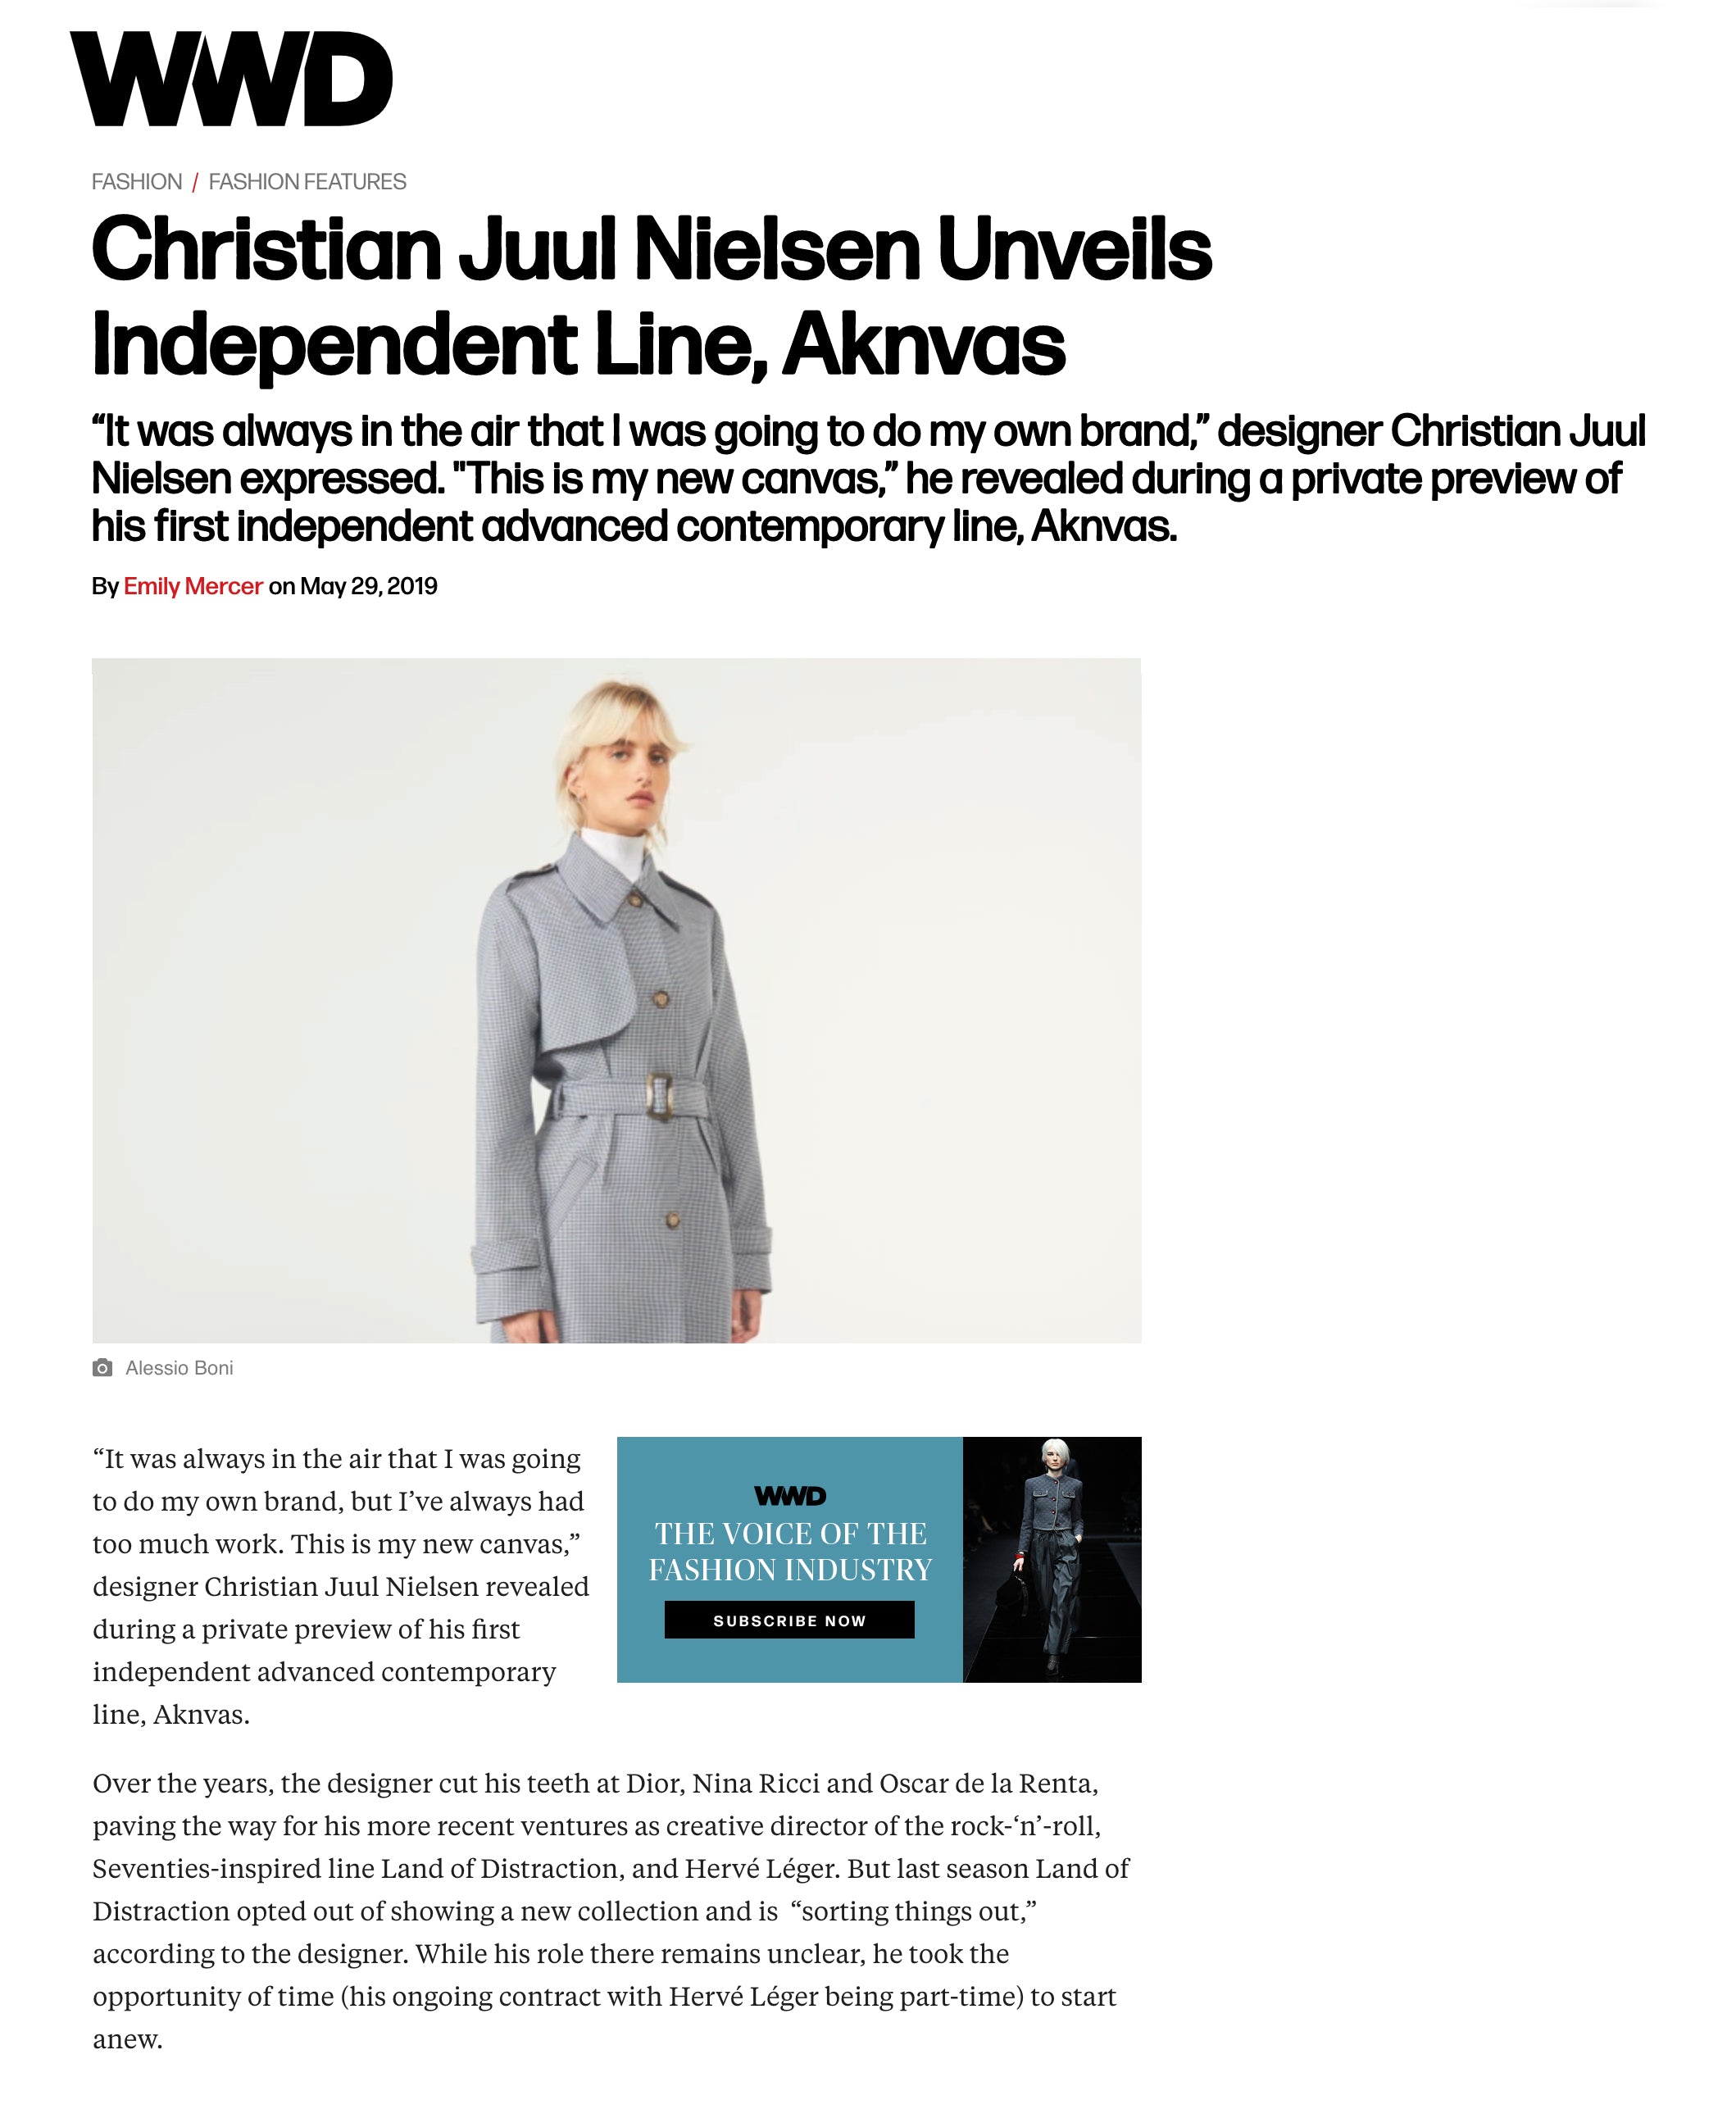 WWD, "Christian Juul Nielsen Unveils Independent Line, Aknvas" by Emily Mercer